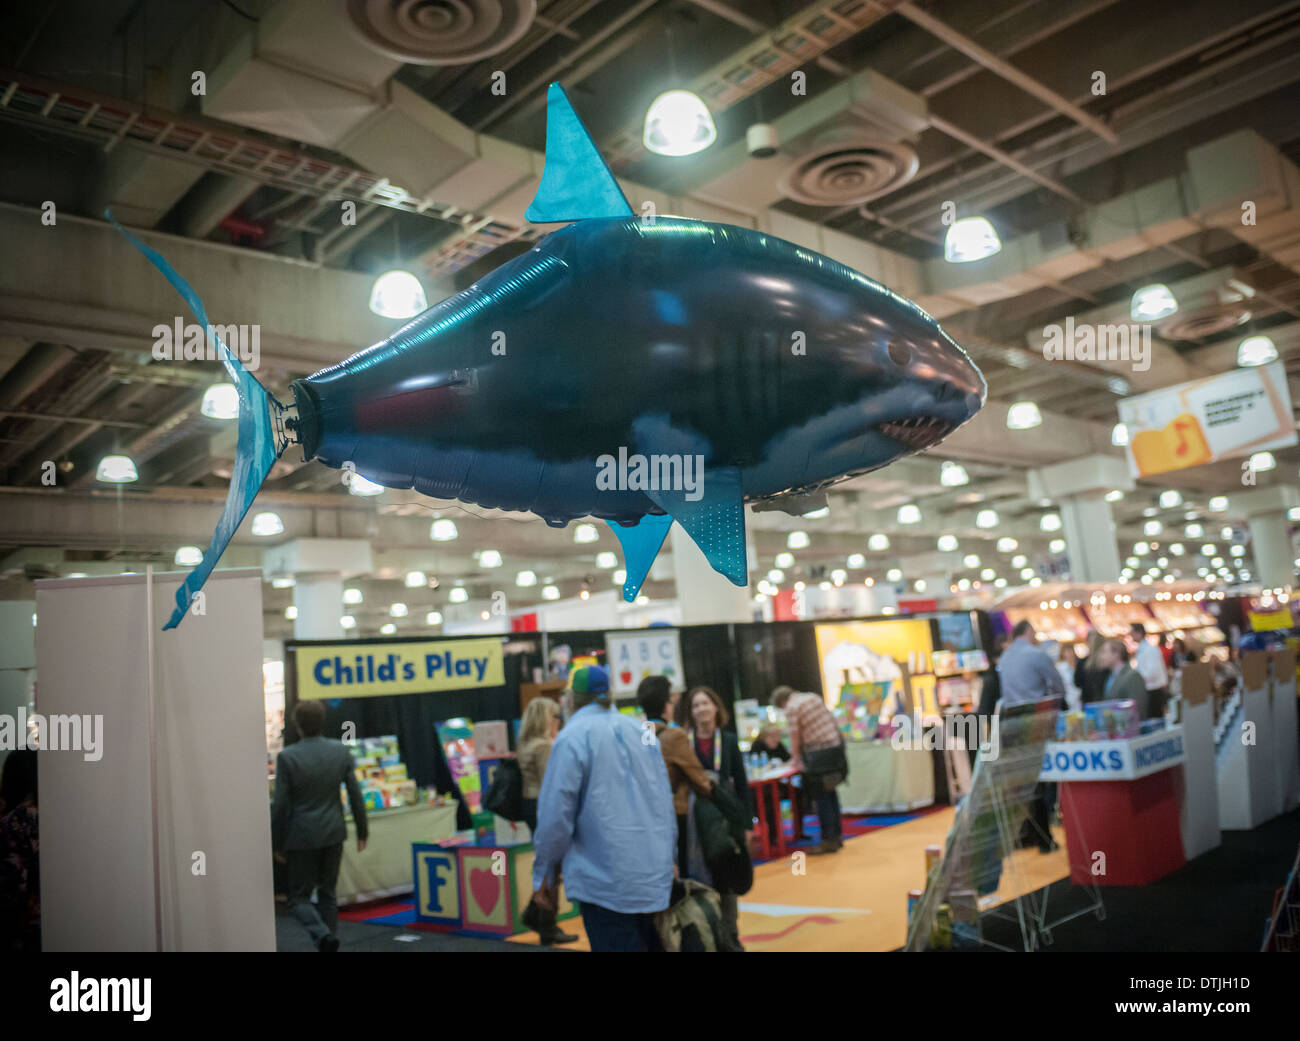 A helium-filled remote controlled "Air Swimmers" Great White Shark floats  above Toy Fair Stock Photo - Alamy